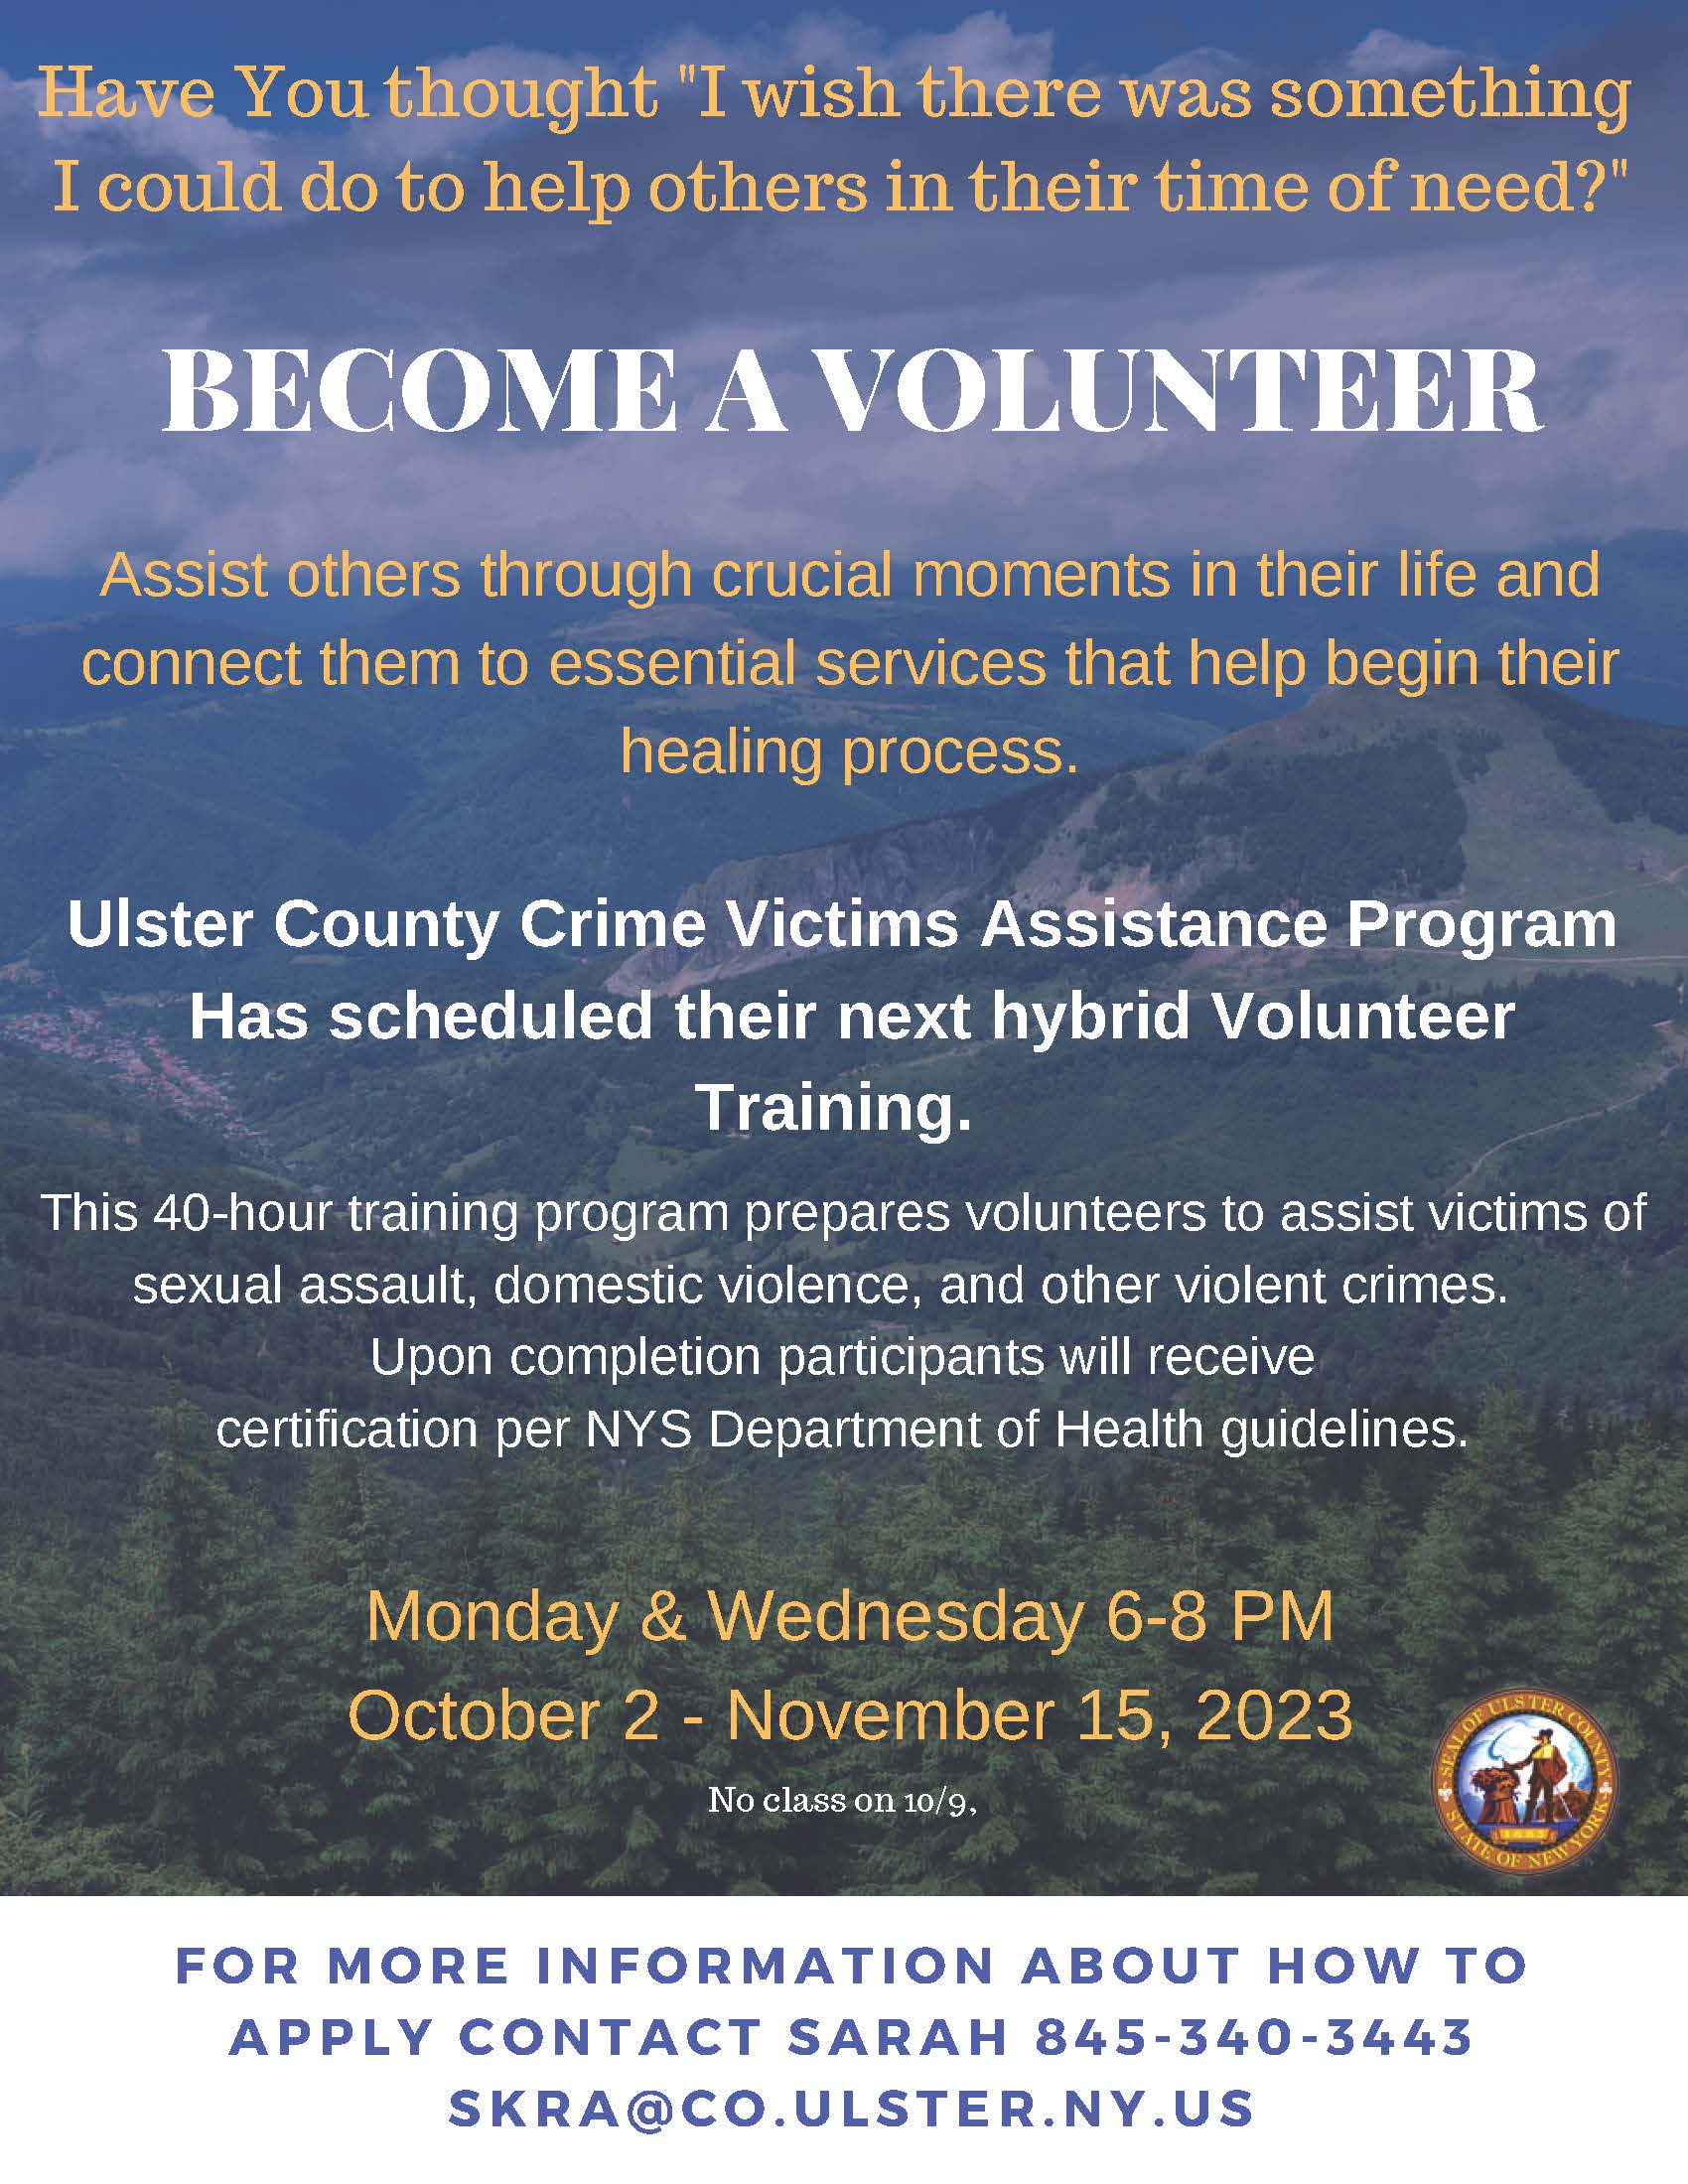 Ulster County Crime Victims Assistance Program Volunteer Training